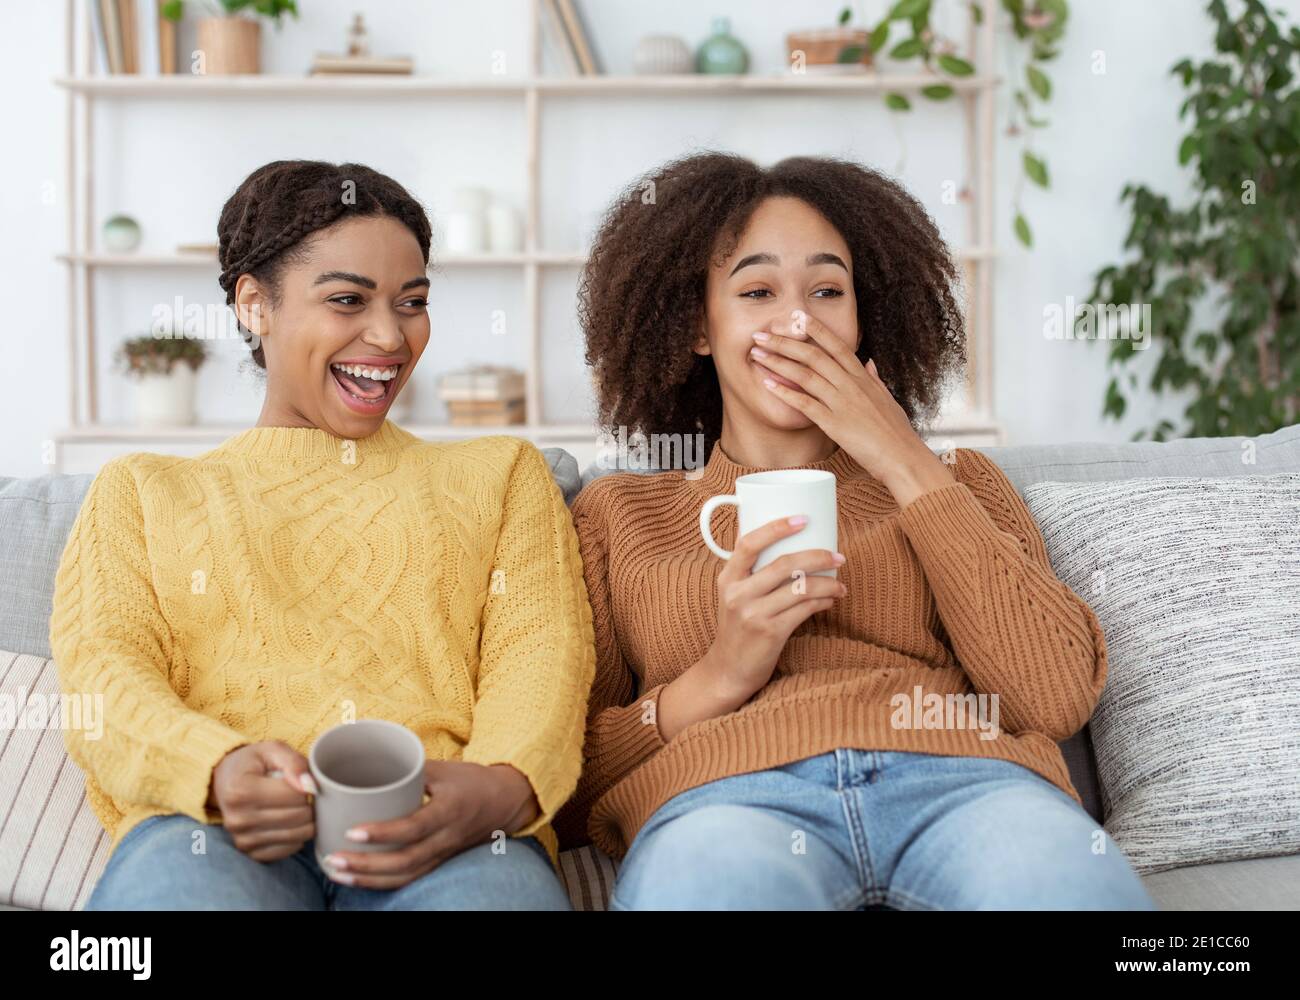 Fun together, hot drink, good mood and great company Stock Photo